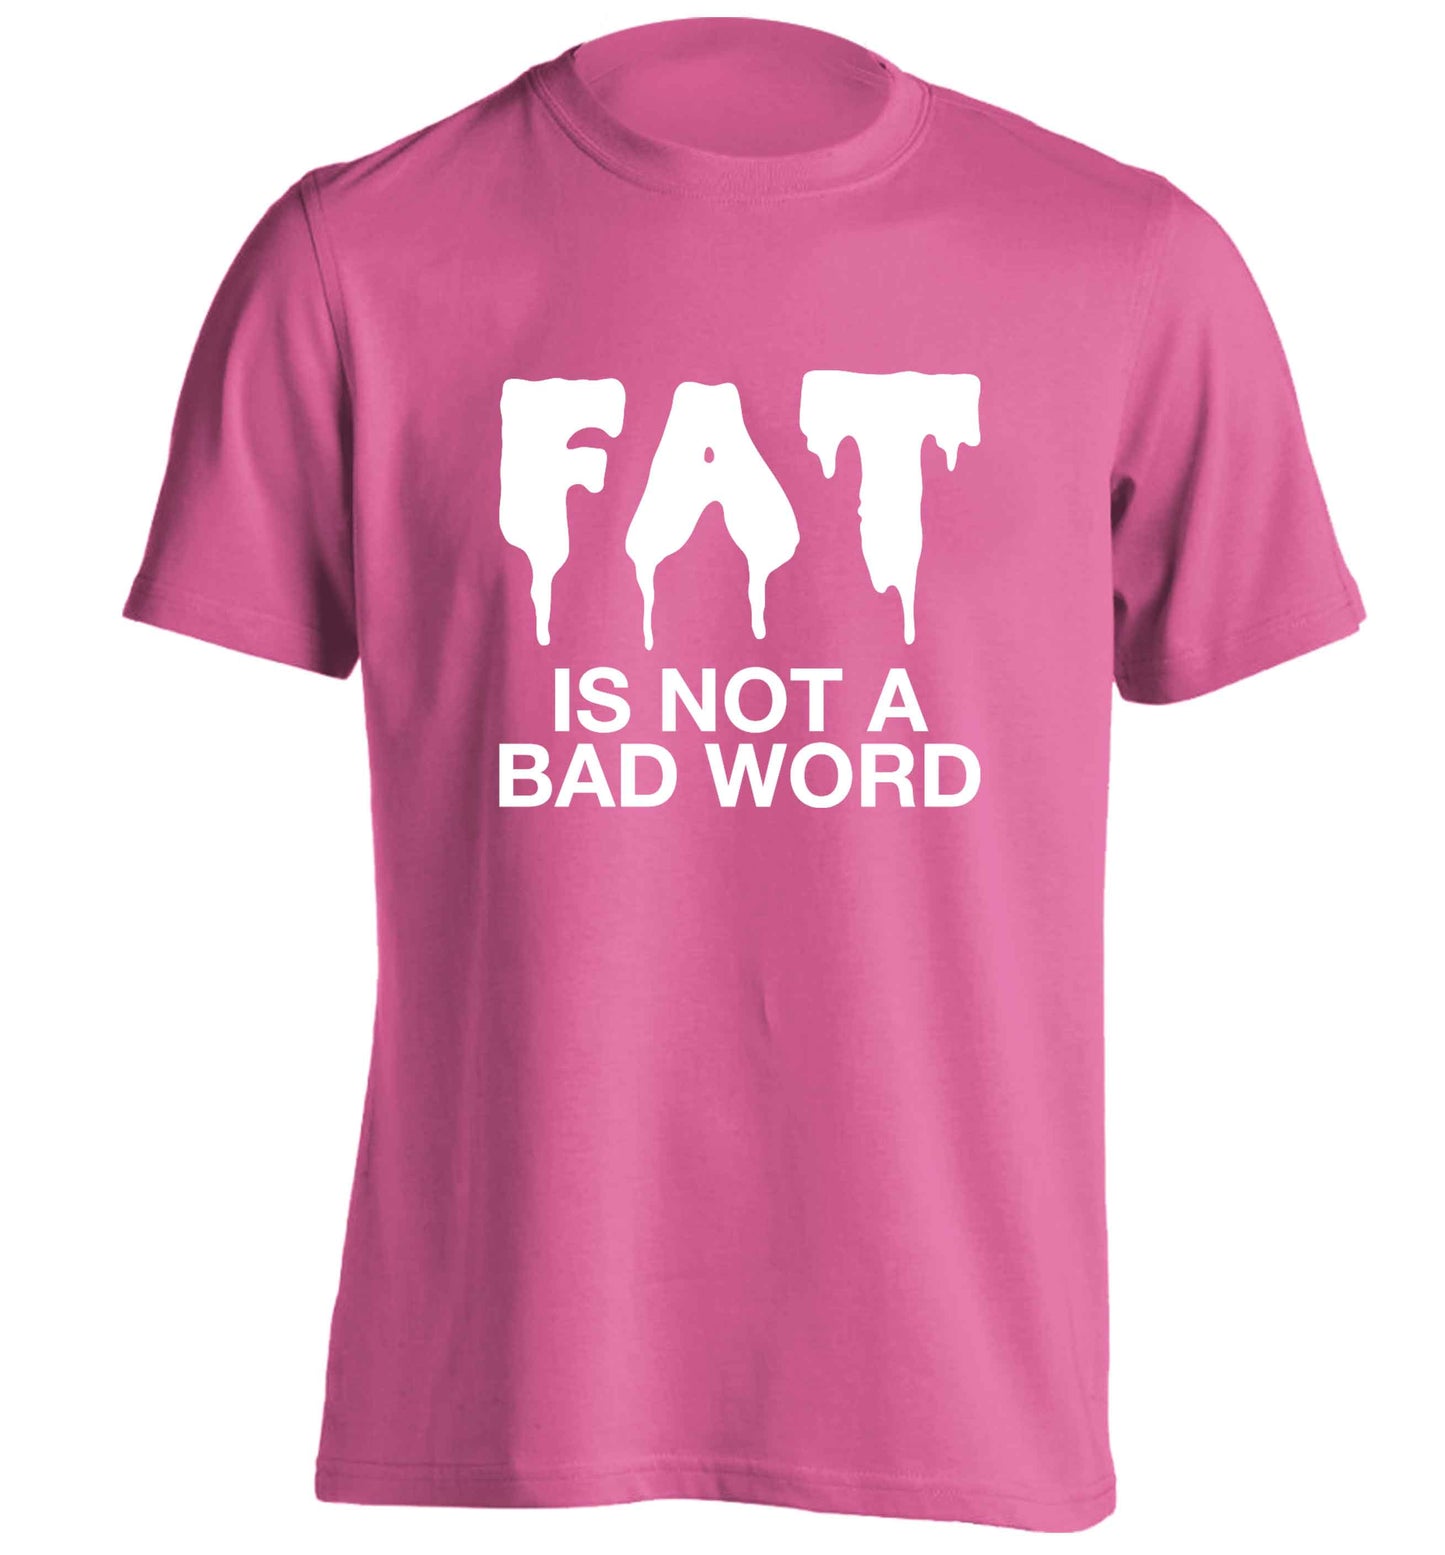 Fat is not a bad word adults unisex pink Tshirt 2XL